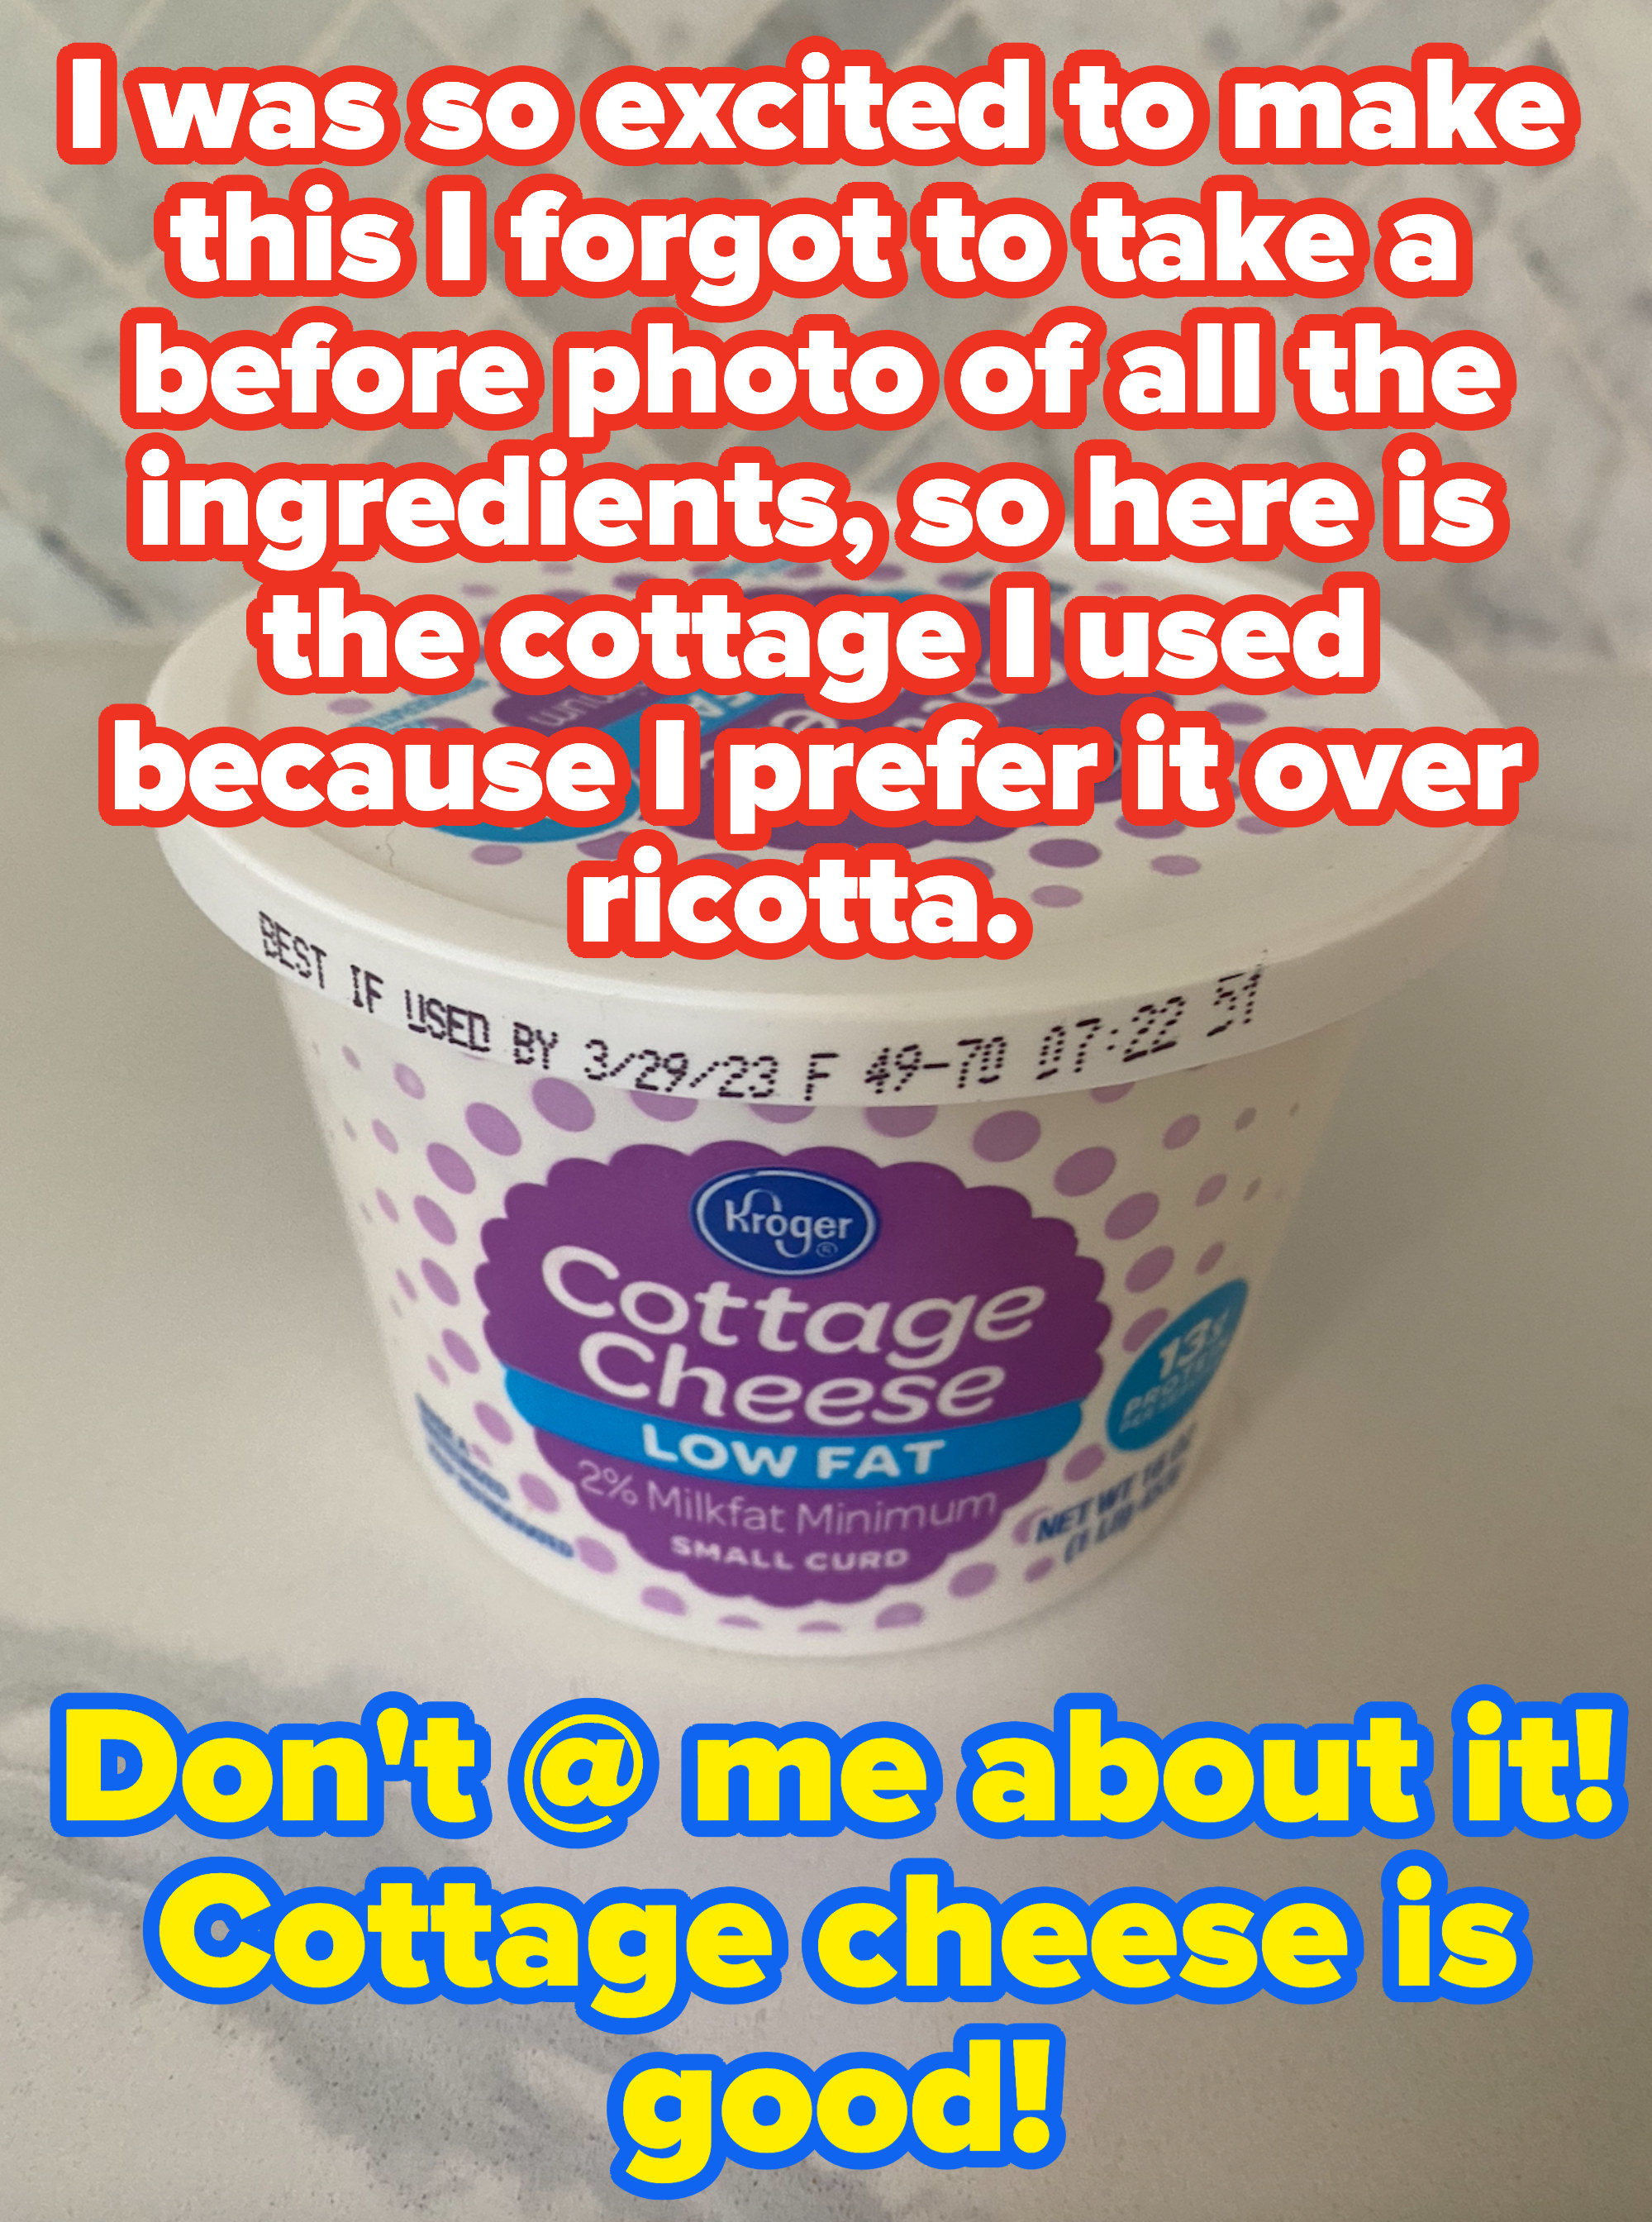 Cottage cheese sitting on the counter with the caption &quot;I was so excited to make this I forgot to take a before photo of all the ingredients, so here is the cottage I used because I prefer it over ricotta&quot;